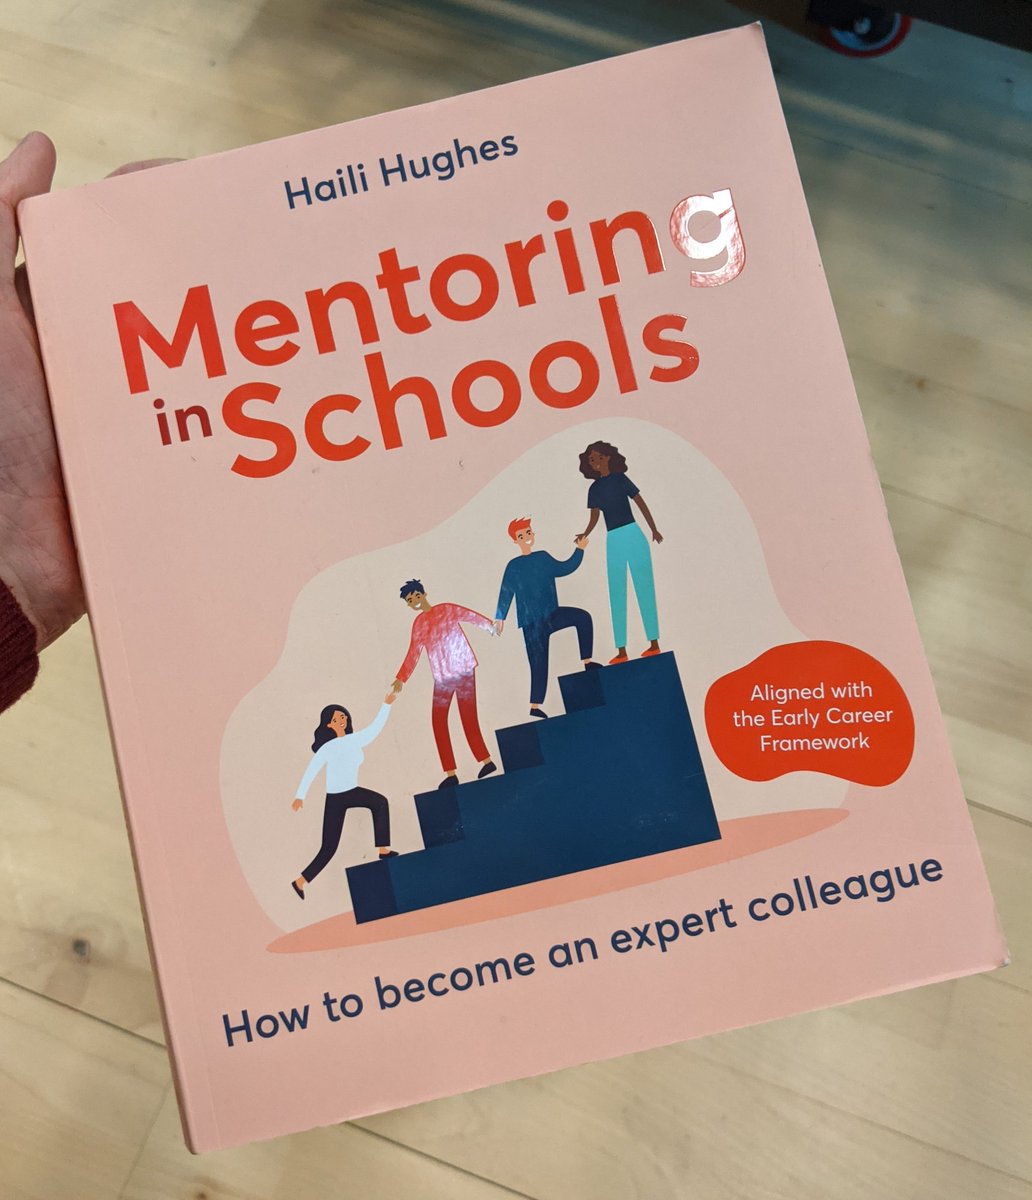 27. This will be so helpful for any mentors. Really well organised and researched.